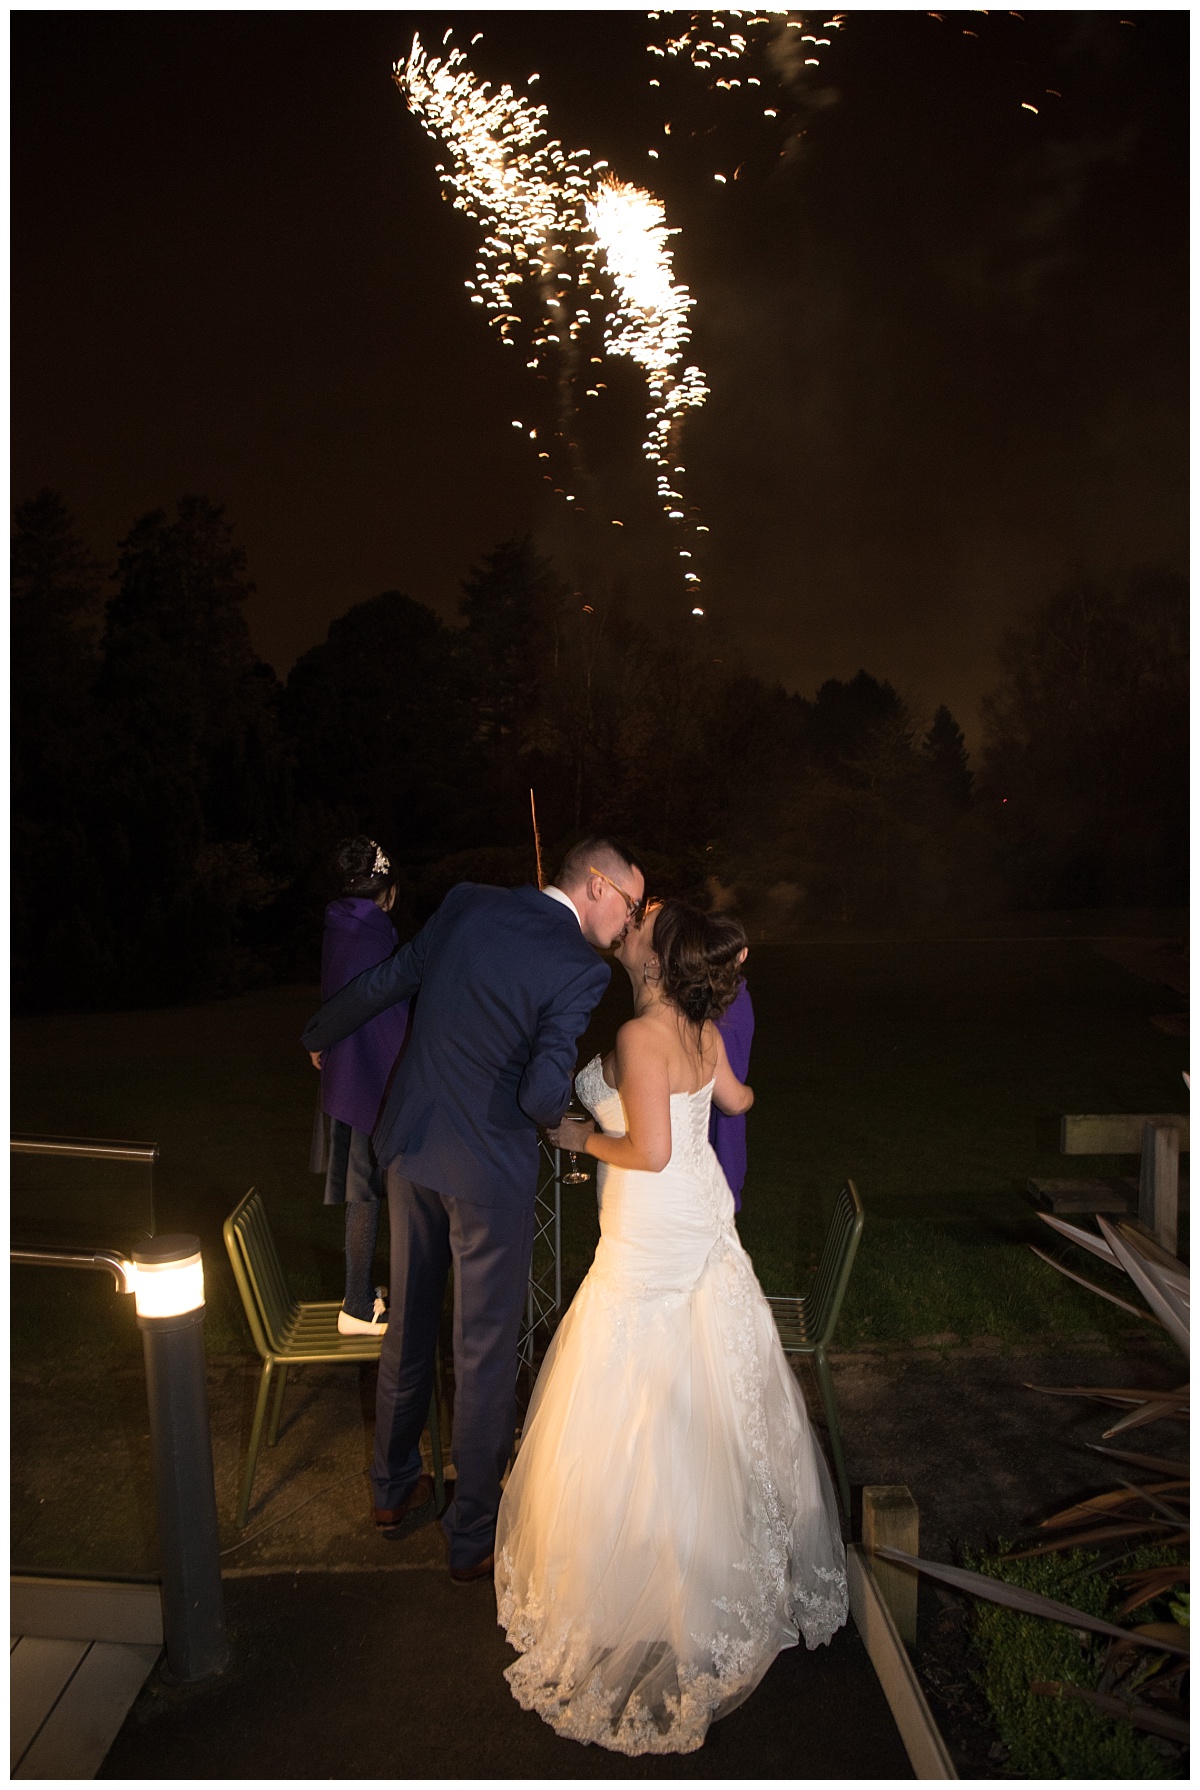 Wedding Photography Manchester - Jemma and Mark's Oddfellows On The Park NYE Wedding 94